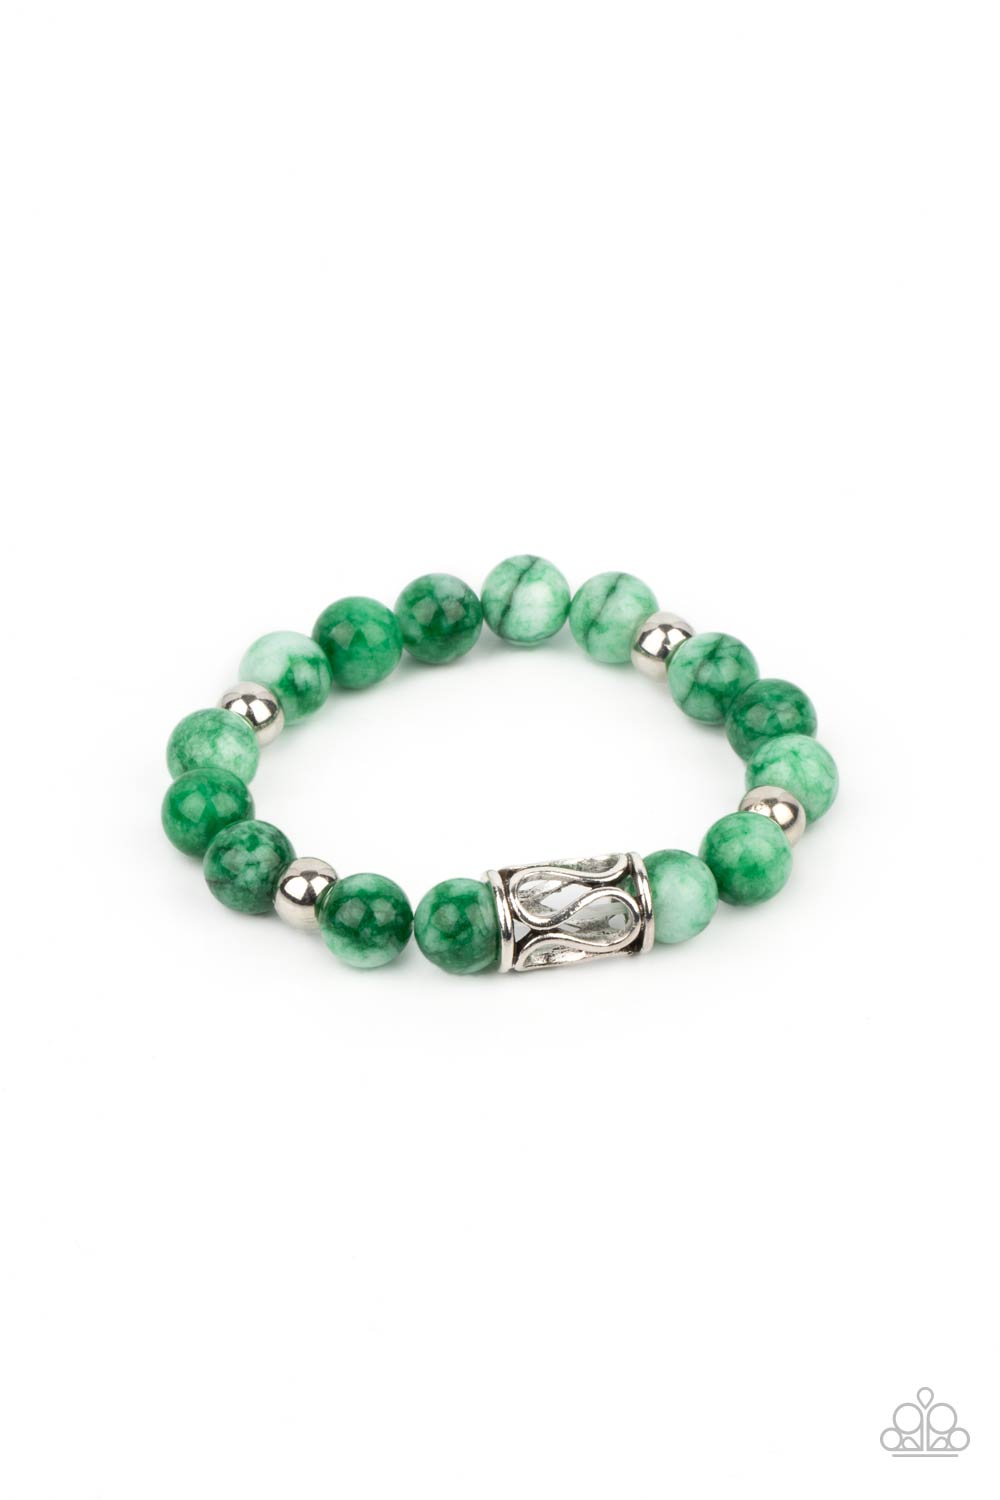 Paparazzi Accessories - Soothes The Soul #B571 - Green Bracelet